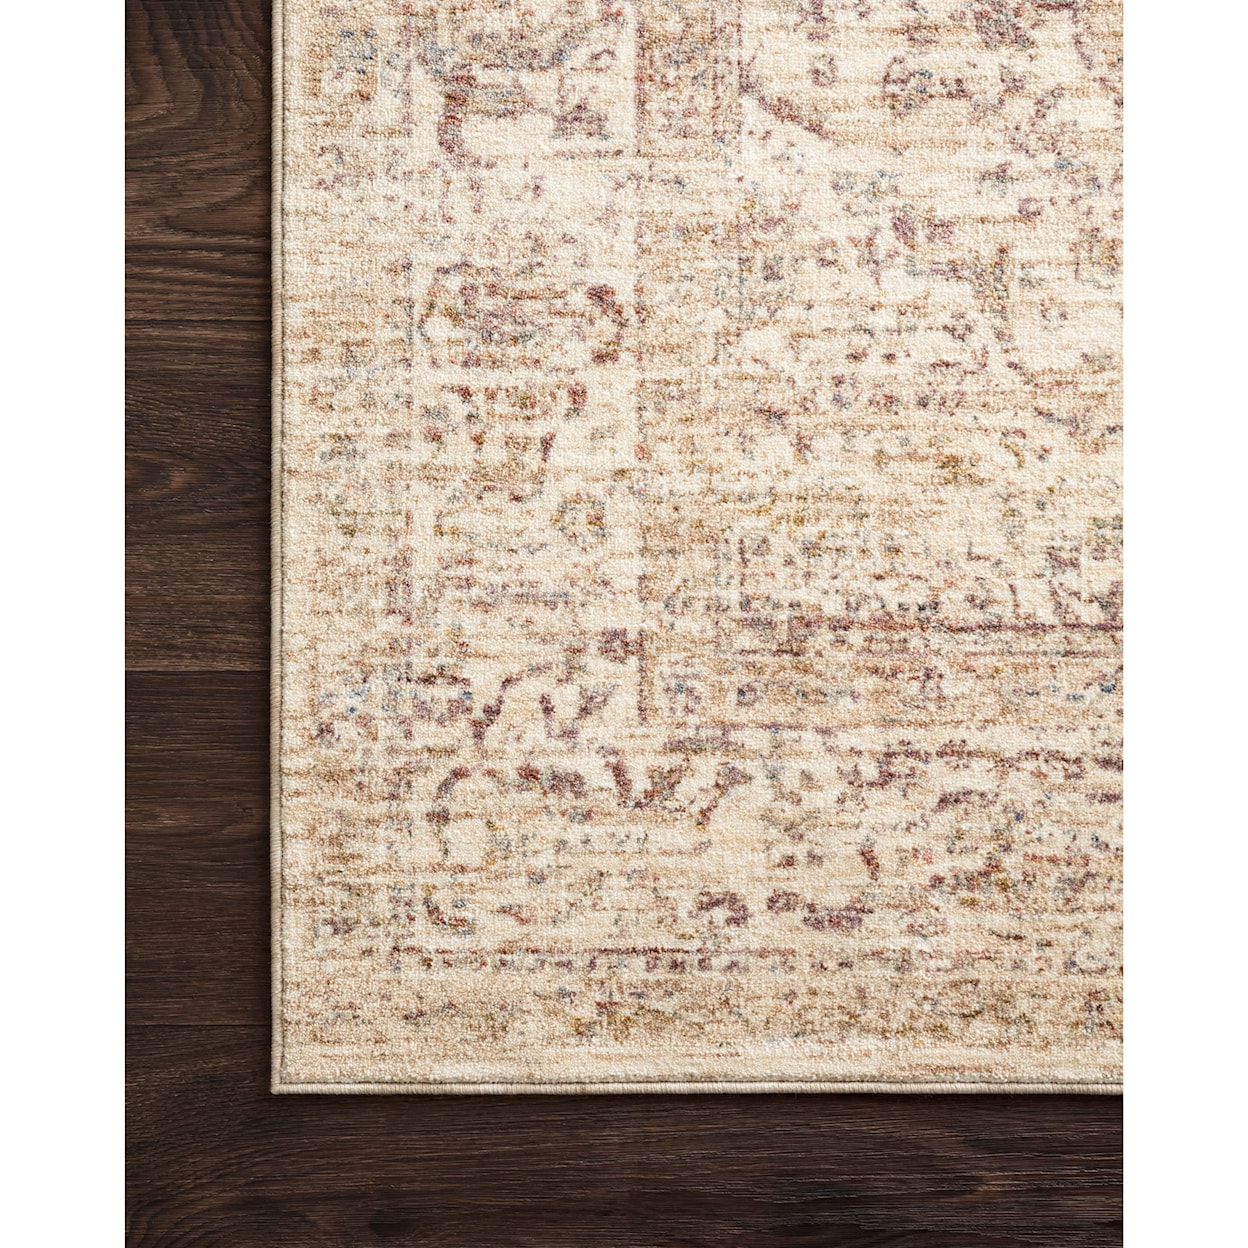 Reeds Rugs Revere 9'6" x 12'5" Ivory / Berry Rug